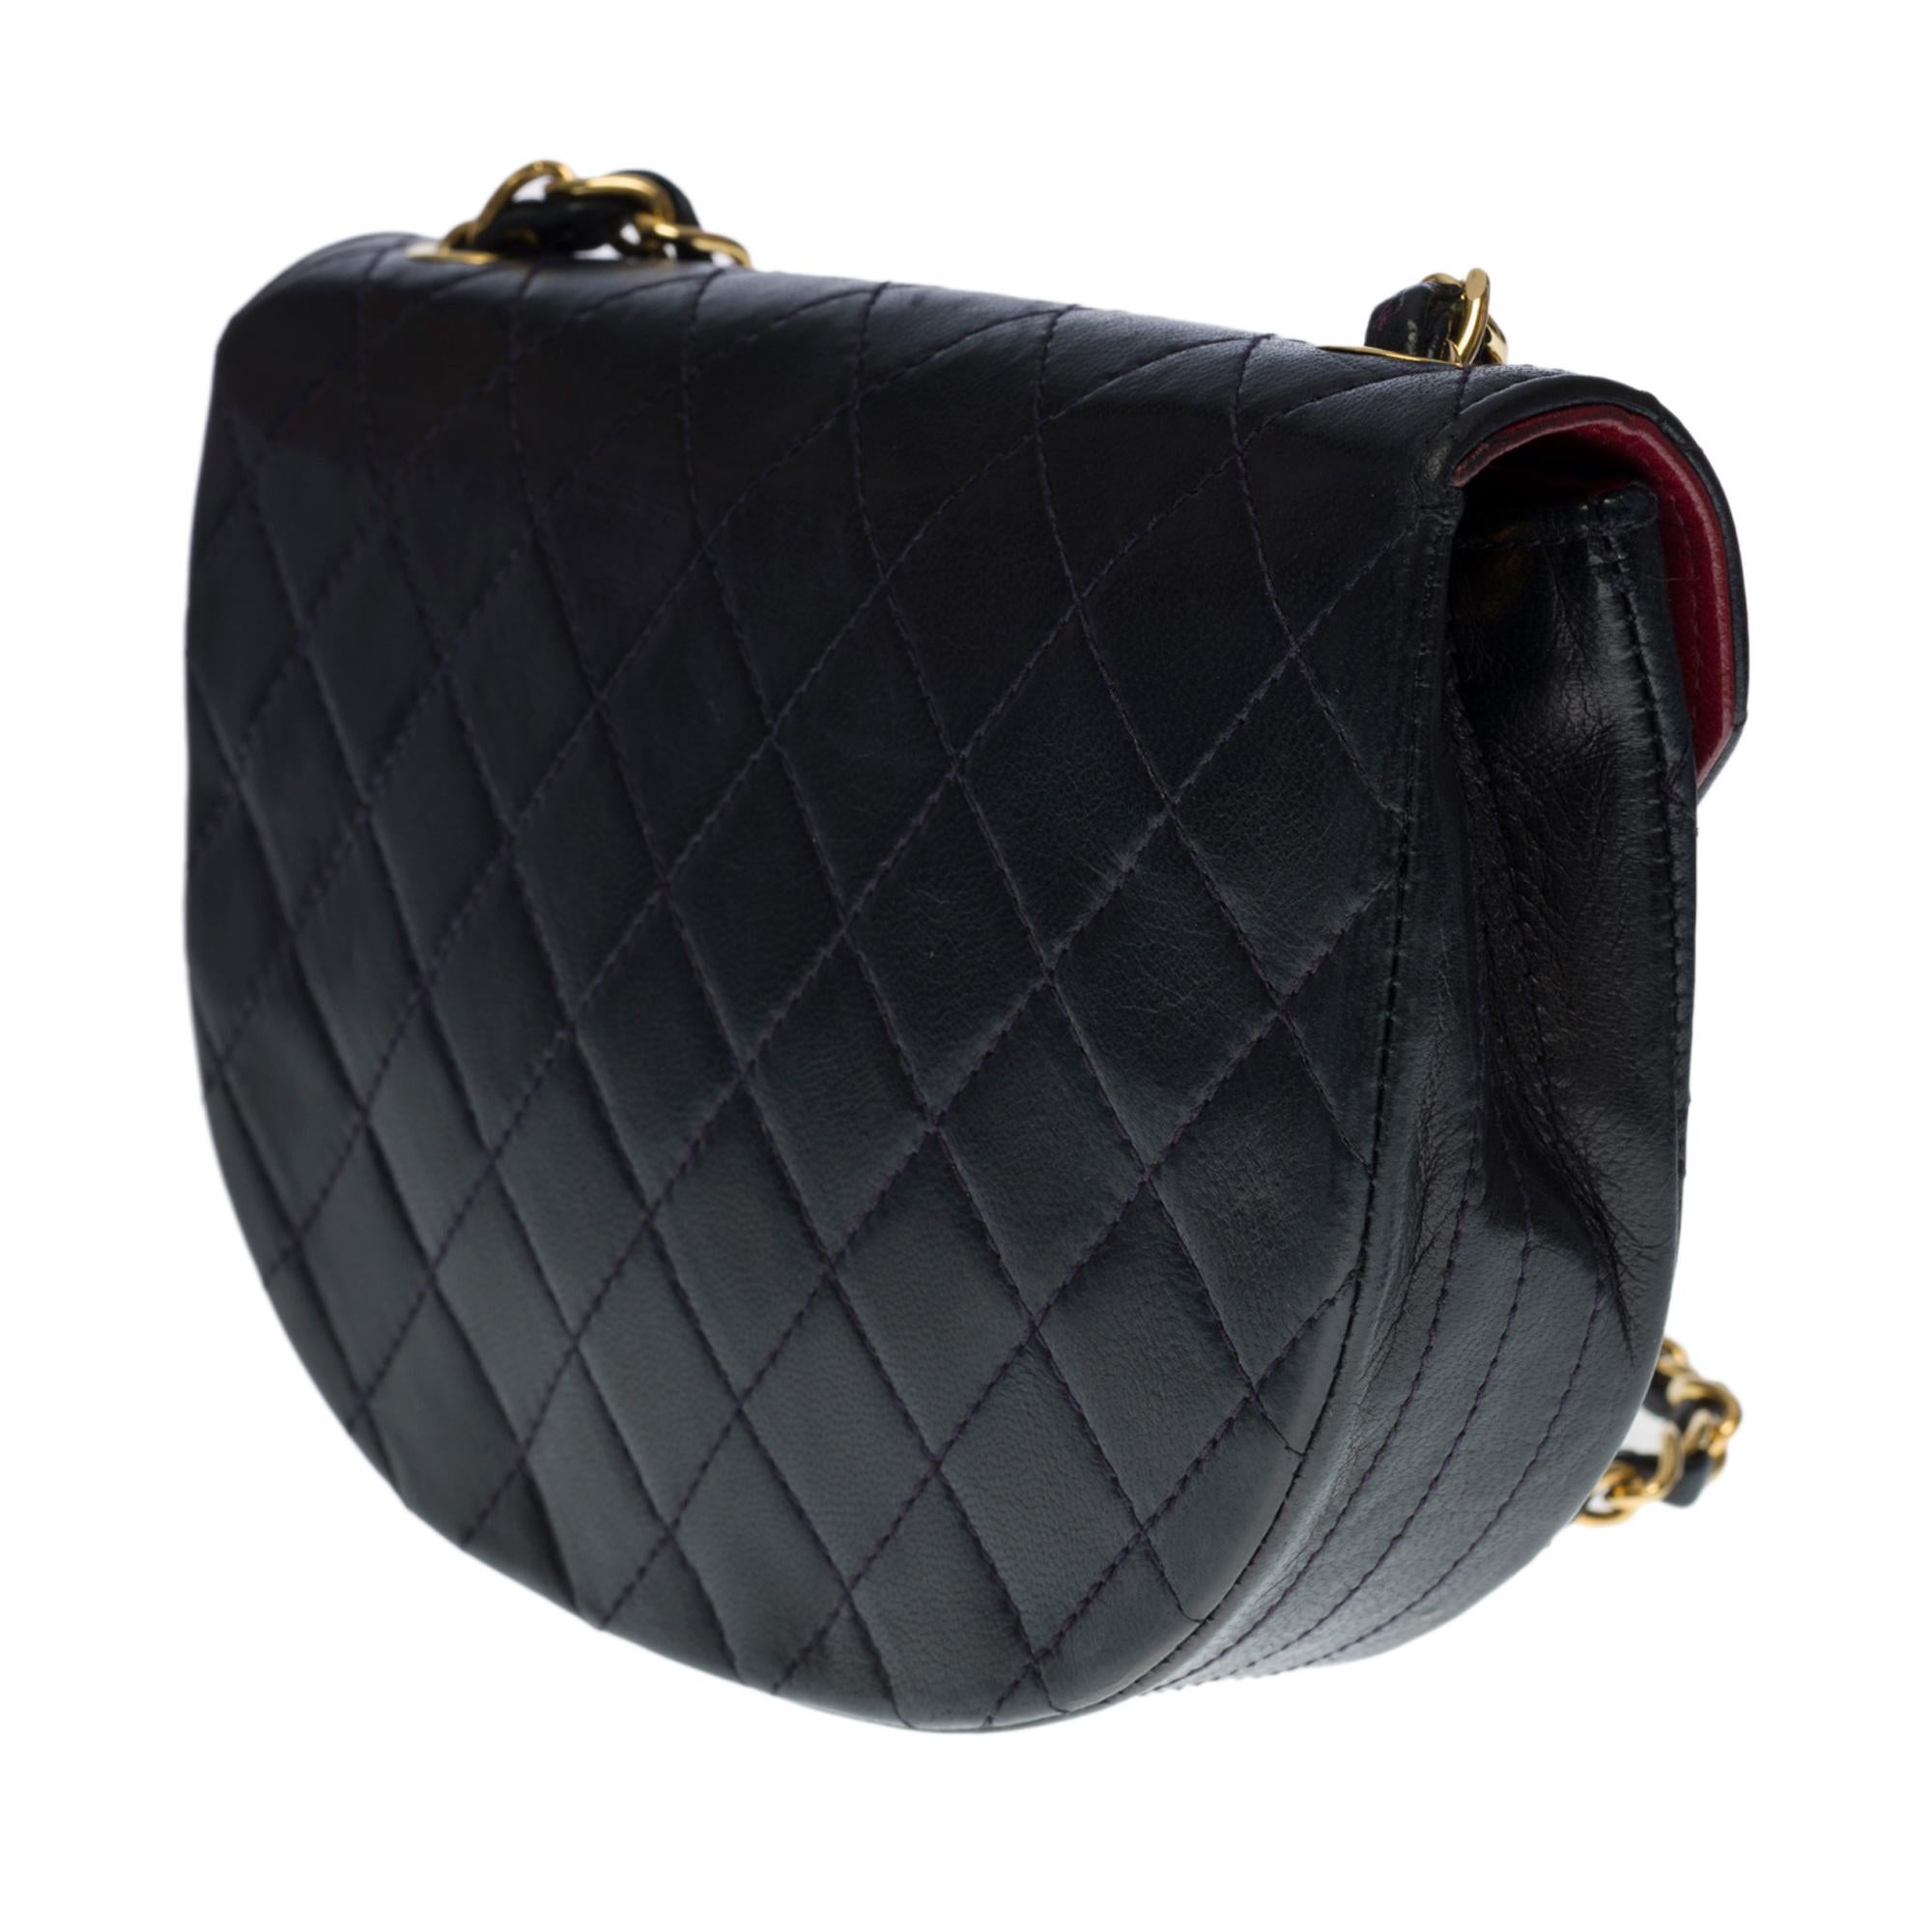 Black Chanel Classic Demi-Lune shoulder Flap bag in navy blue quilted lamb leather, GHW